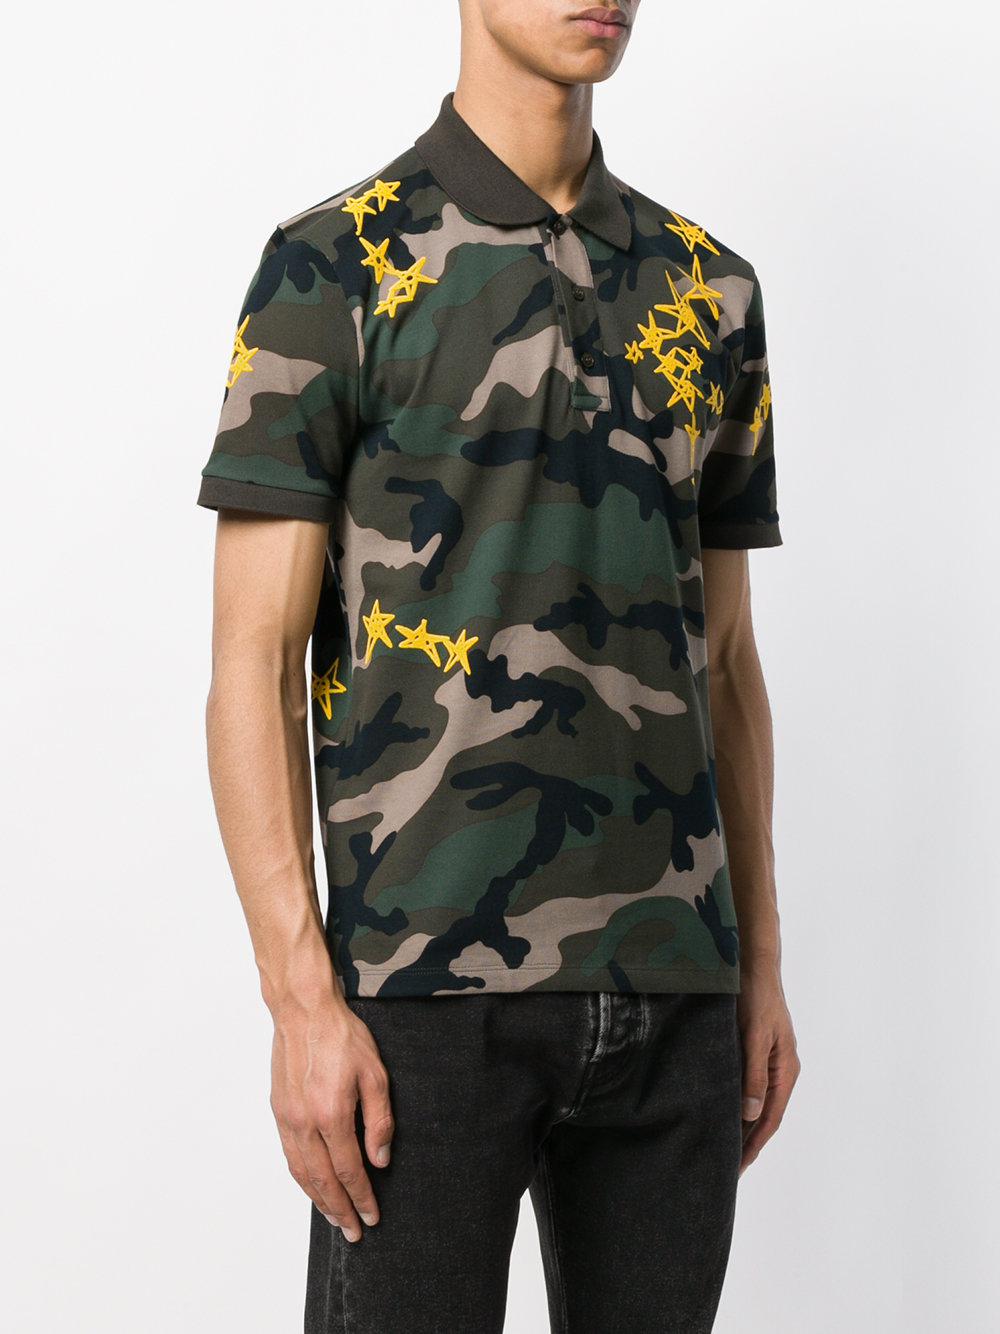 Valentino Camouflage And Star Print Polo Shirt in Green for Men | Lyst